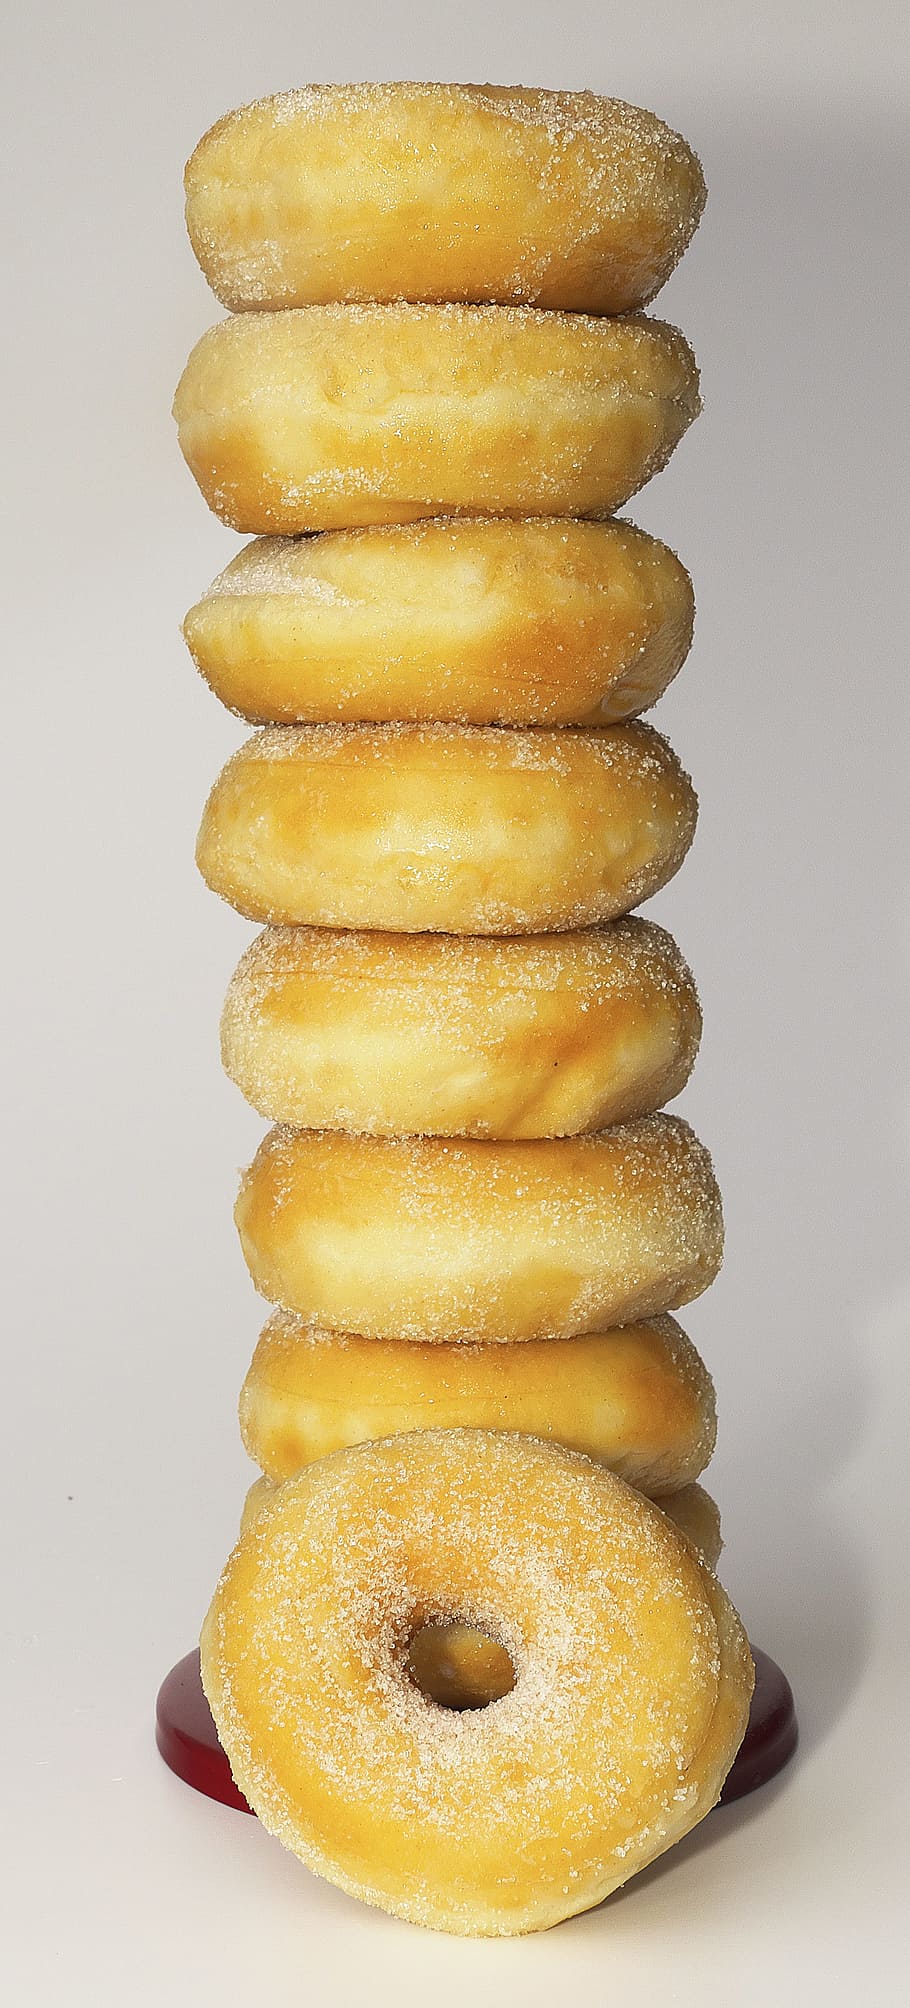 donut, pastries pastry, stacked, one above the other, pastries, baked, bake, hole doughnuts, torus, ring